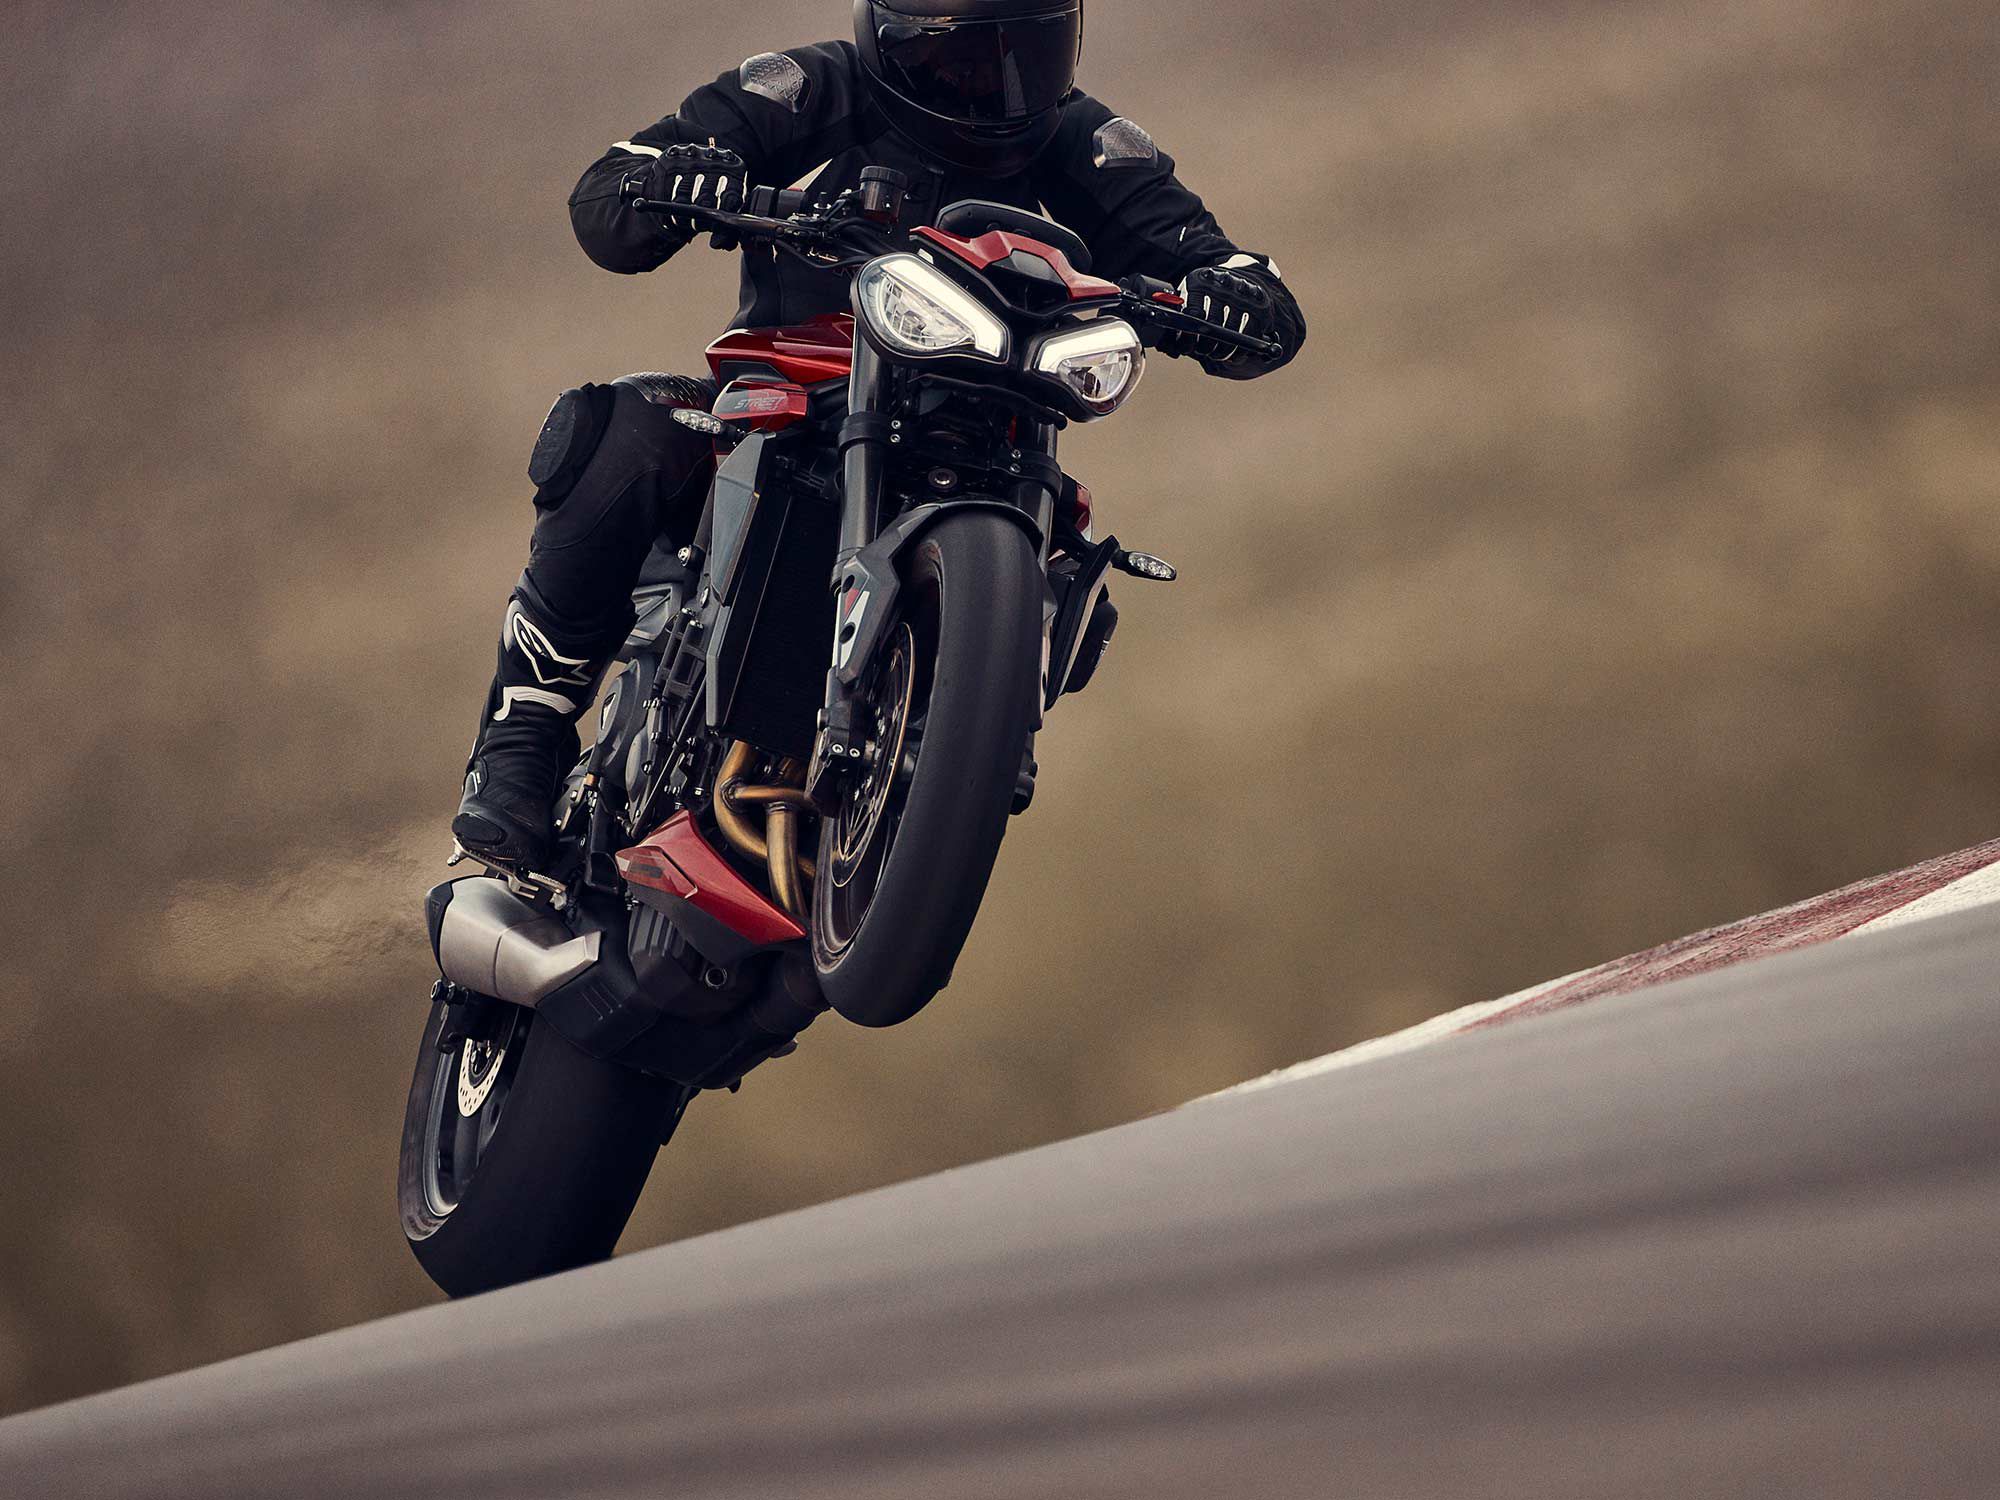 The Street Triple 765 RS showing off track mode and wheelie, simultaneously.